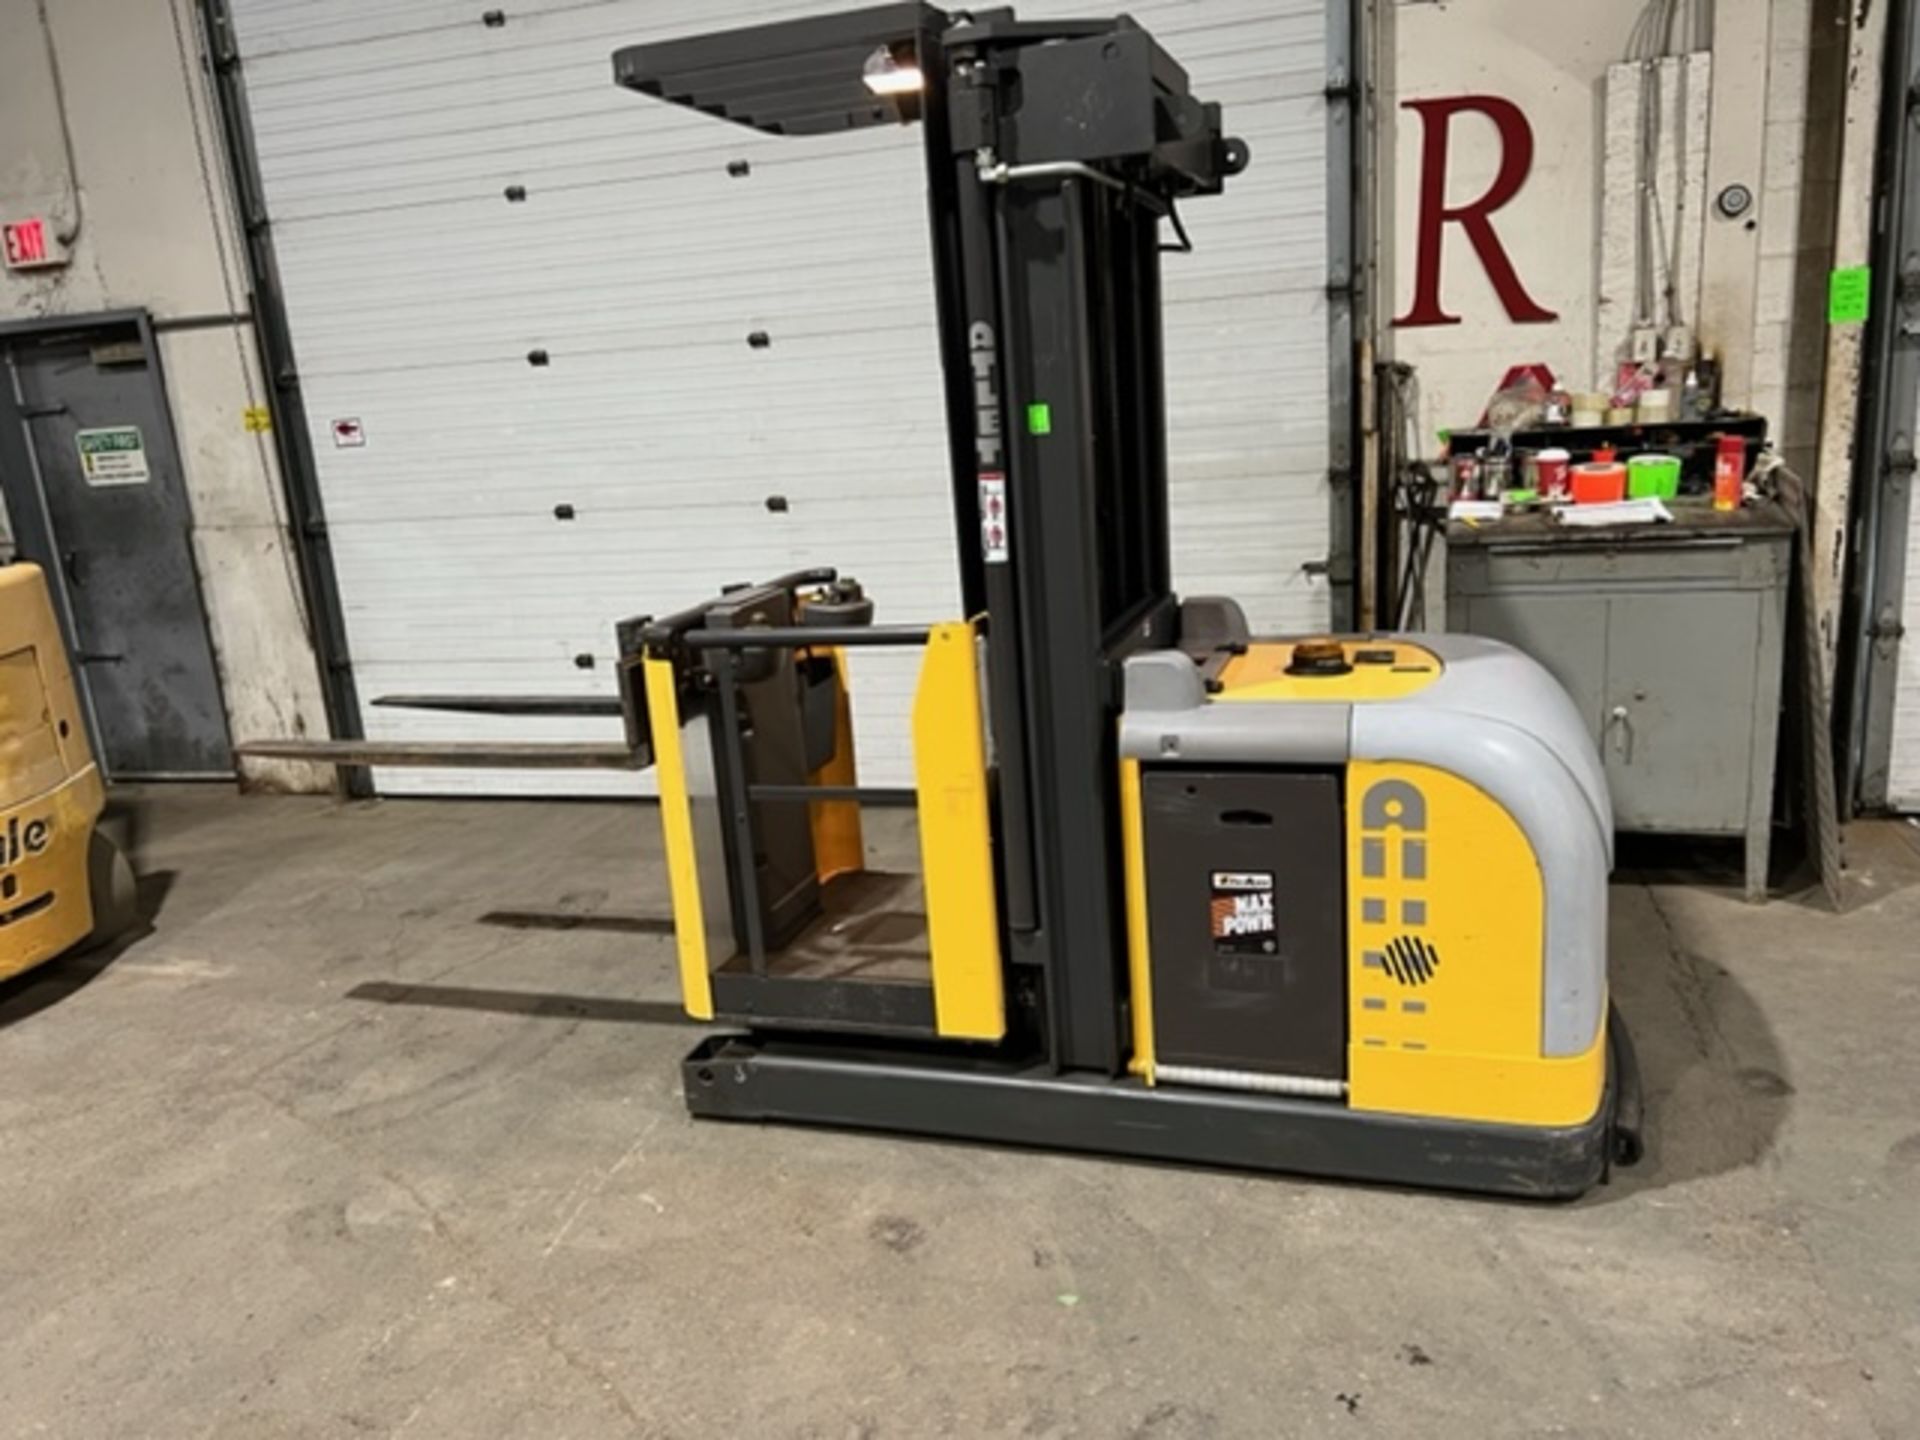 ATLET Dock Stacker Pallet Stacker Order Picker 2200lbs capacity electric Powered Cart with VERY